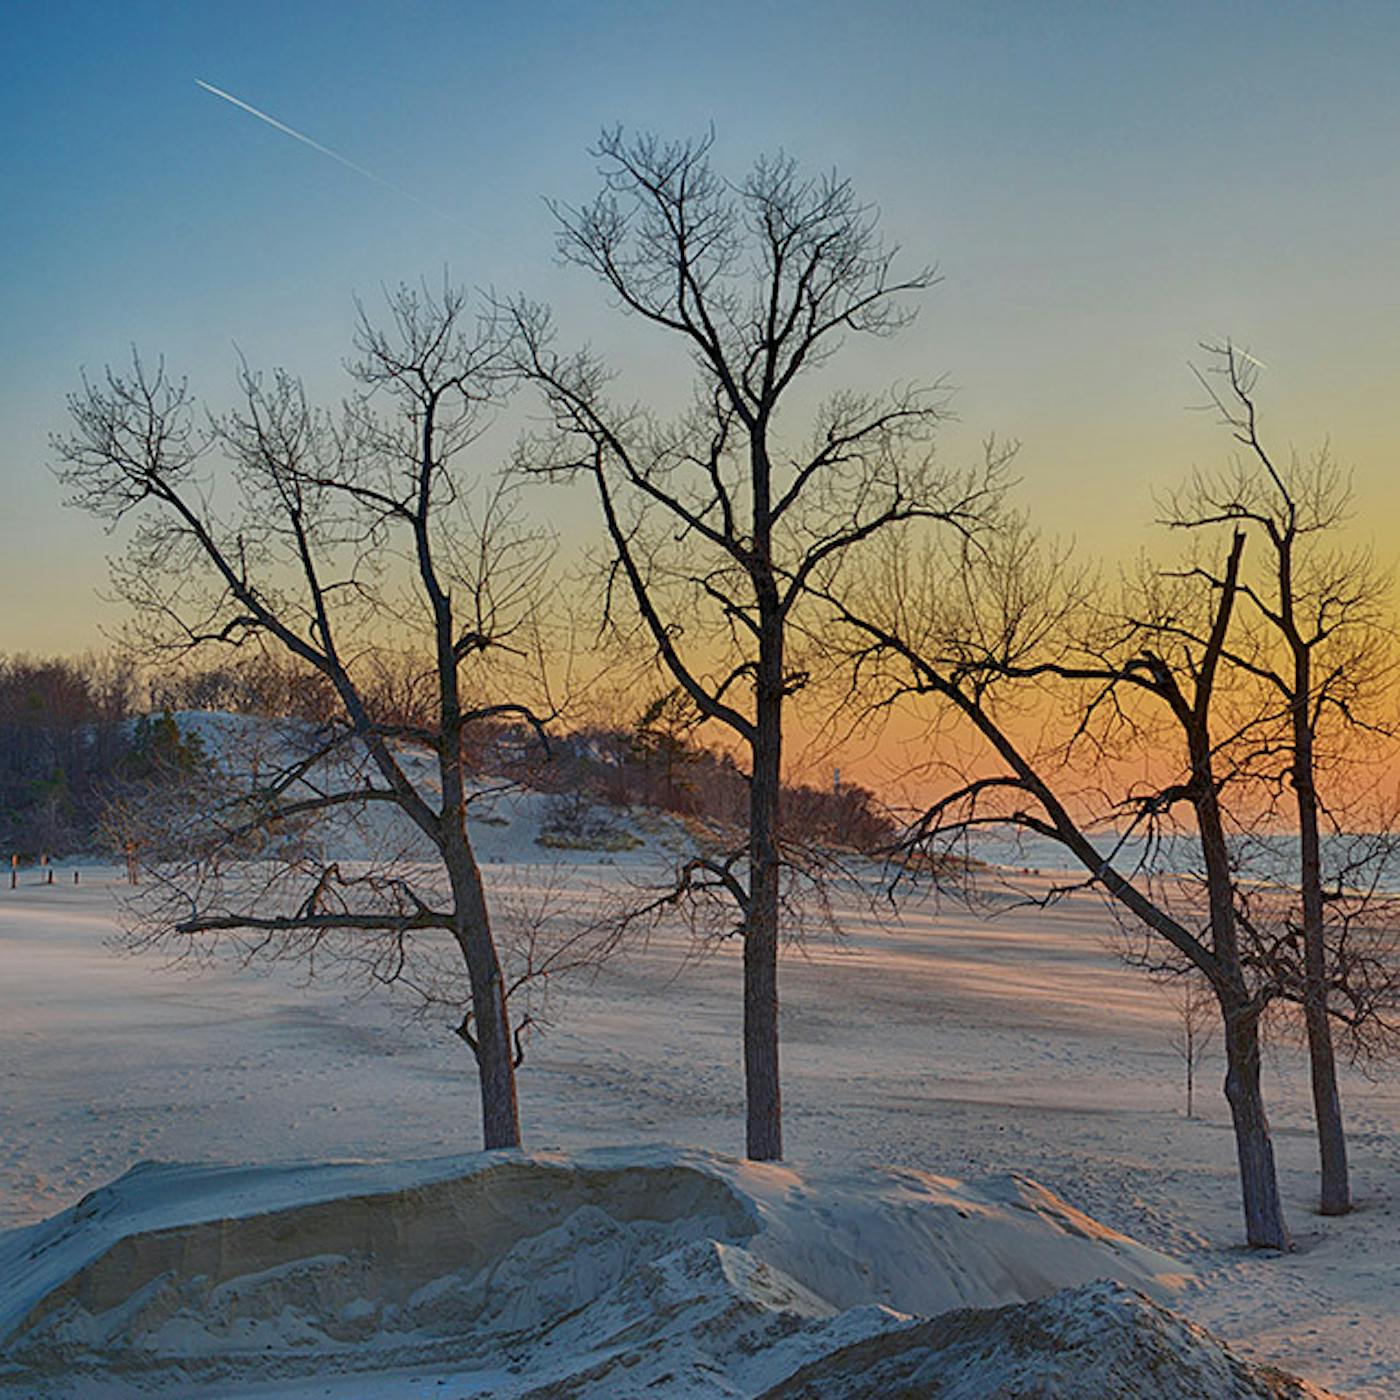 Sunset at Indiana Dunes National Park in winter (photo by iStock))